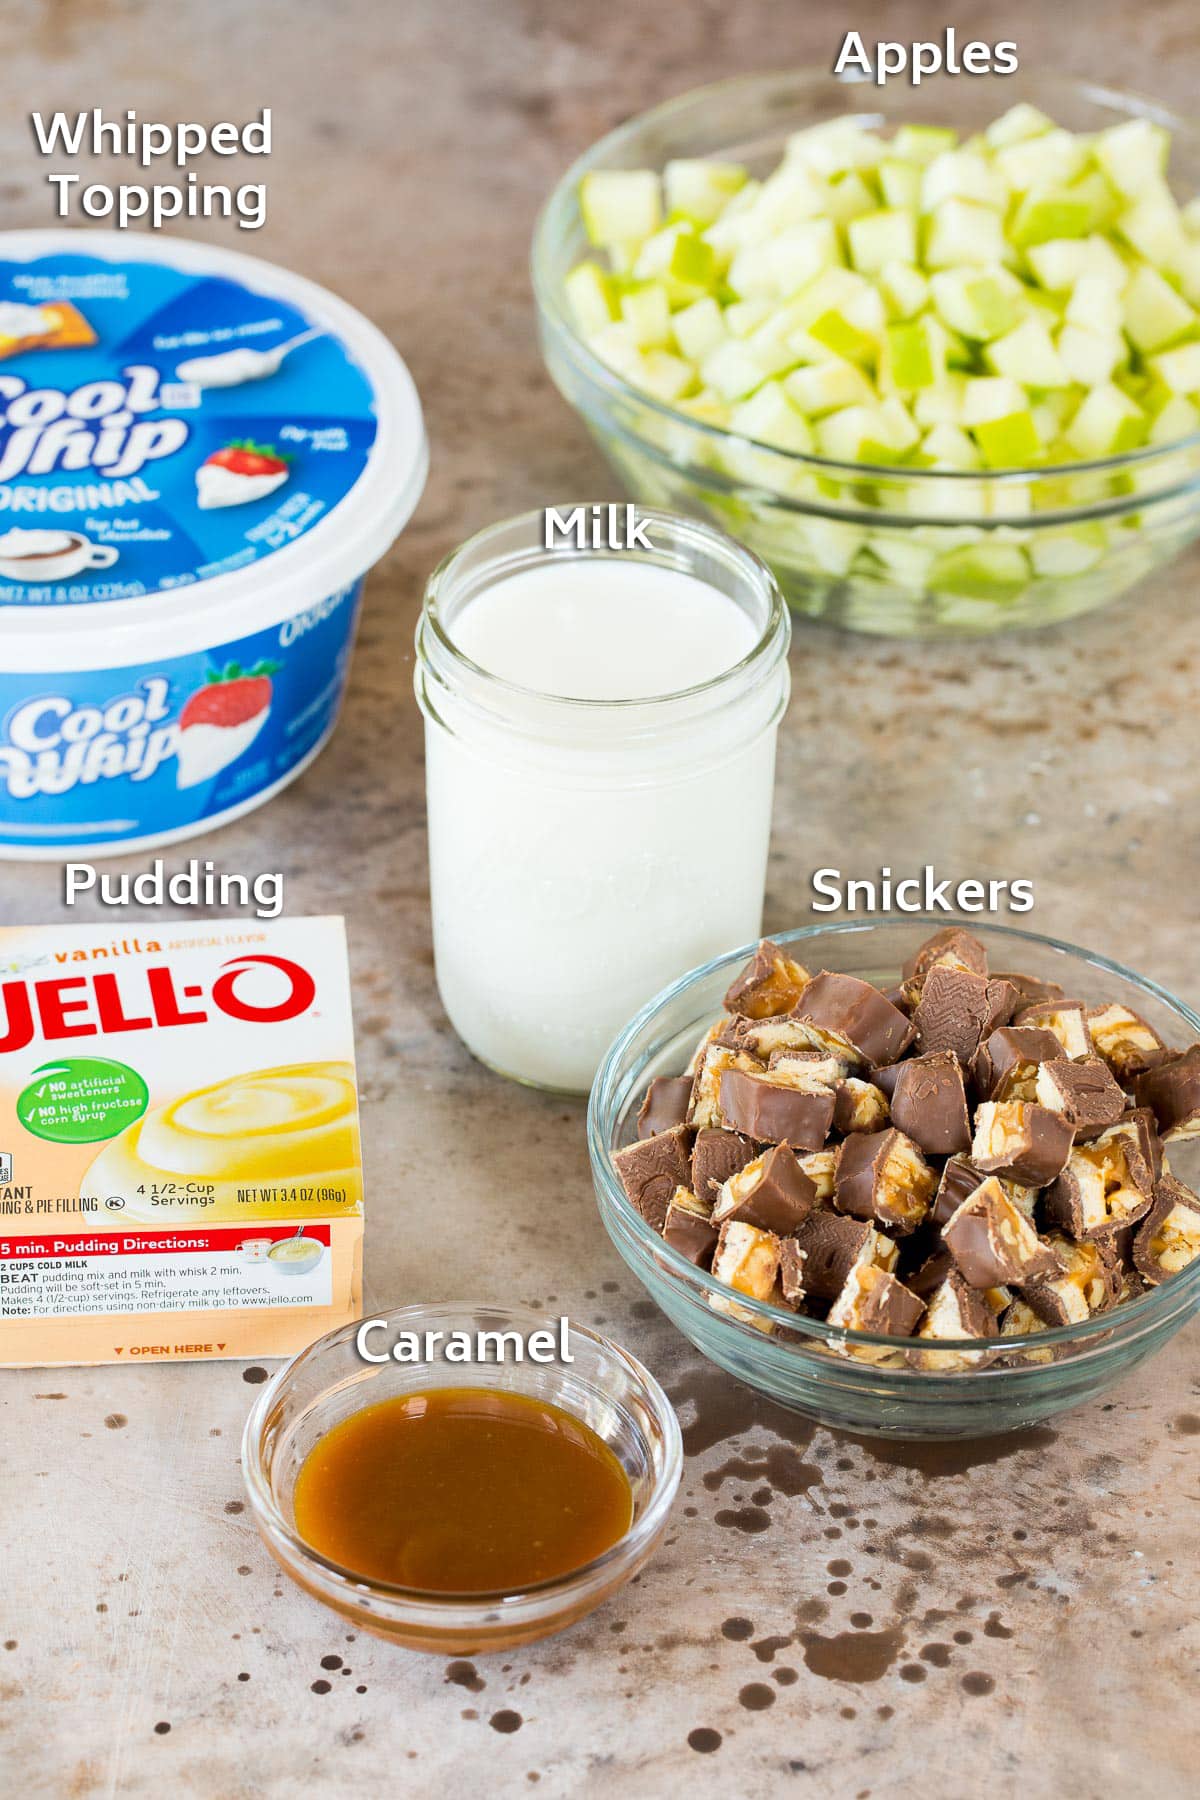 Ingredients including apples, milk, pudding mix, candy bars and caramel.